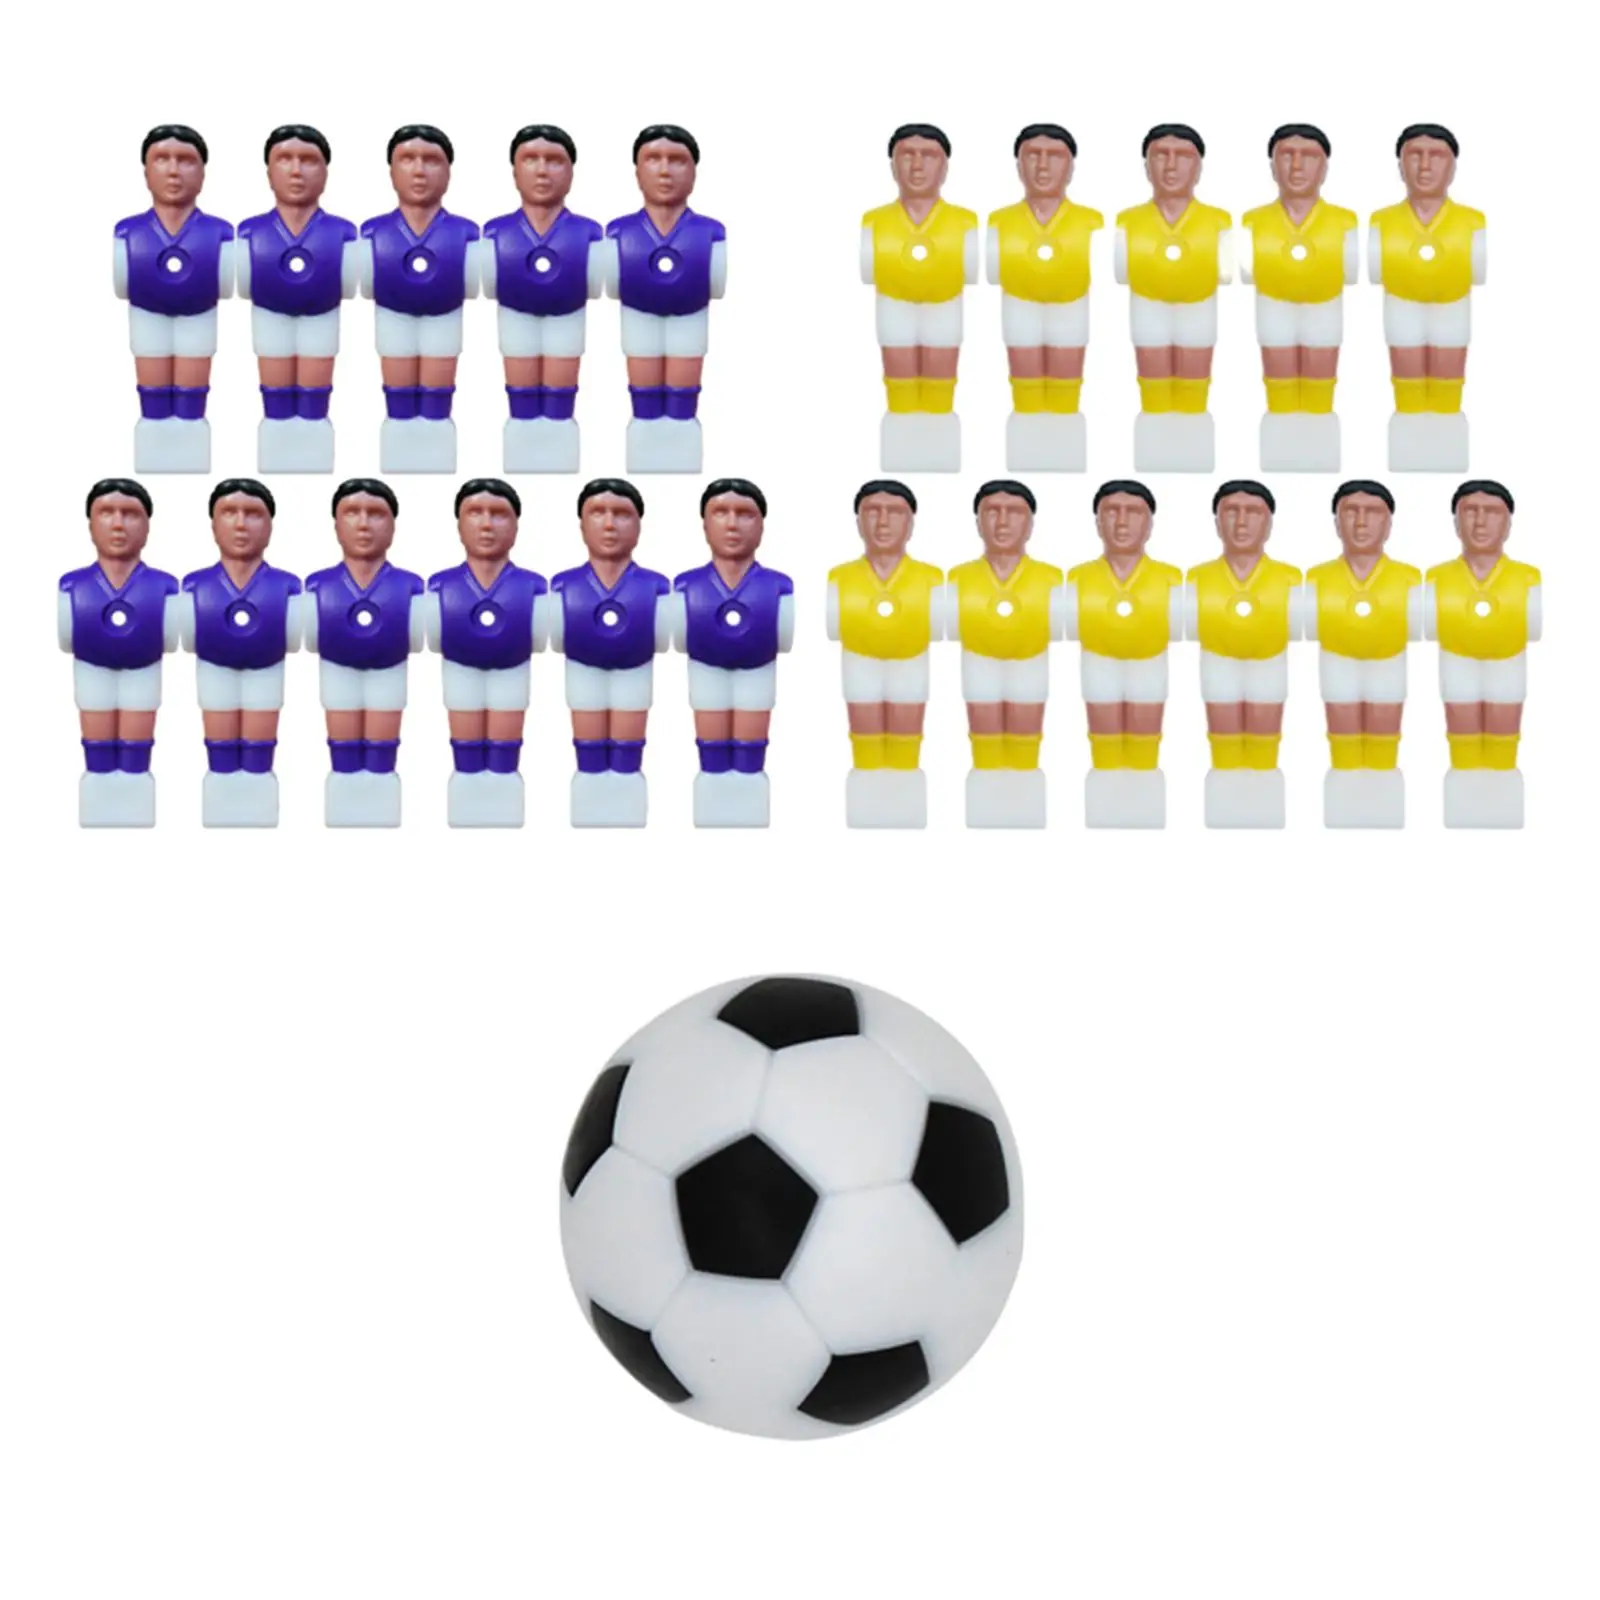 Foosball Table Men Player Soccer Player Football Players Figures Toys Table Foosball Player Football Players Figure Model